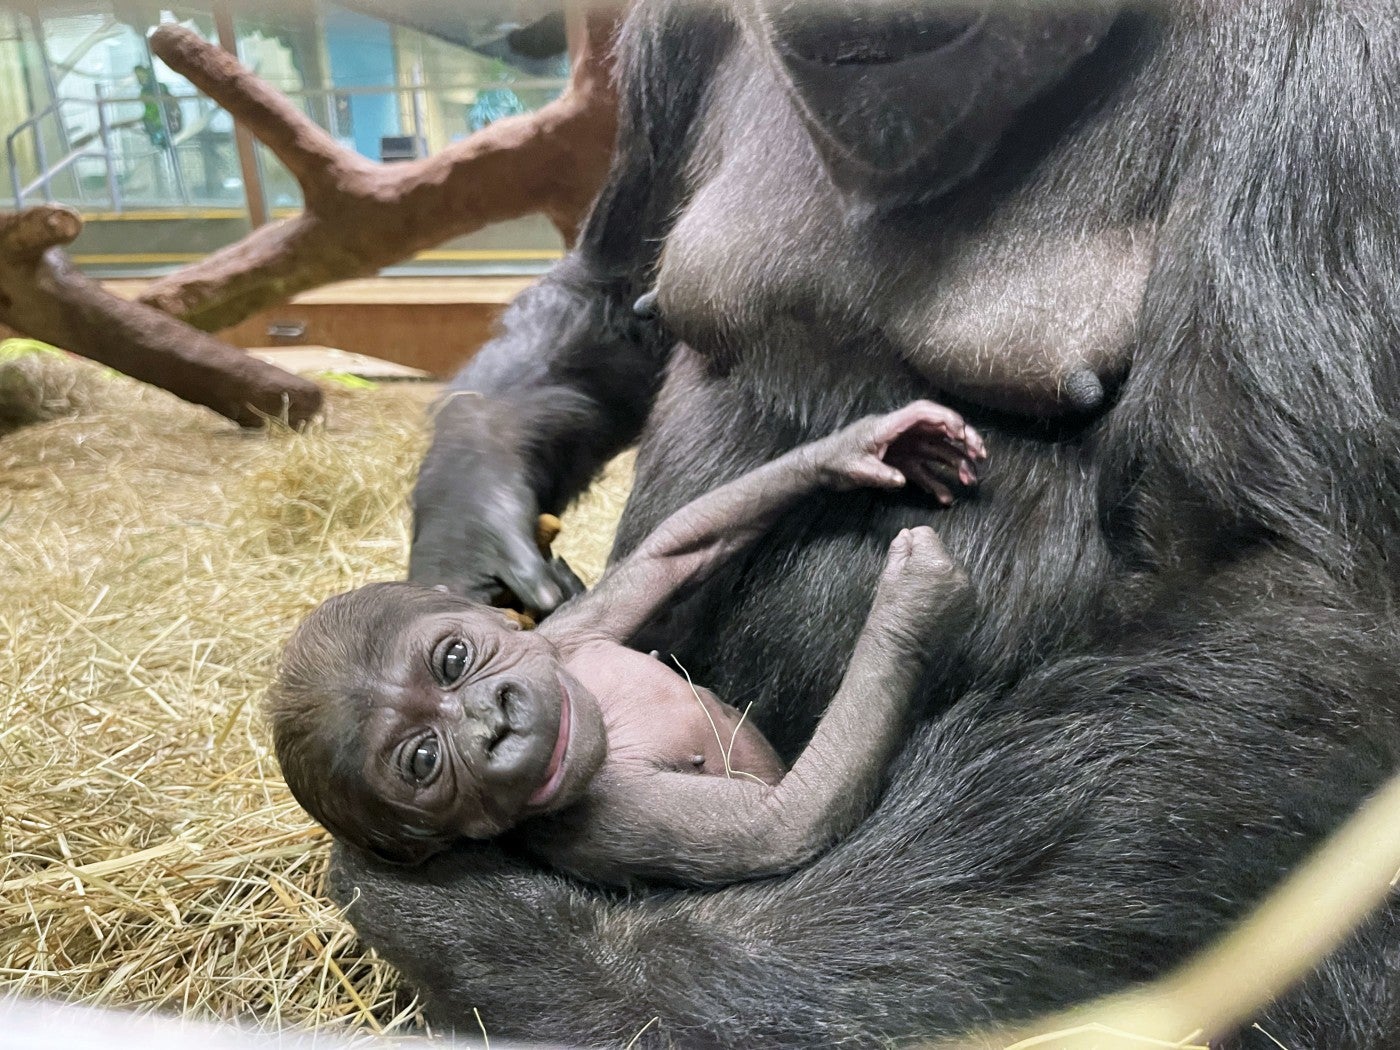 Western lowland gorilla Zahra turns toward the viewer while Calaya cradles her in her left hand.